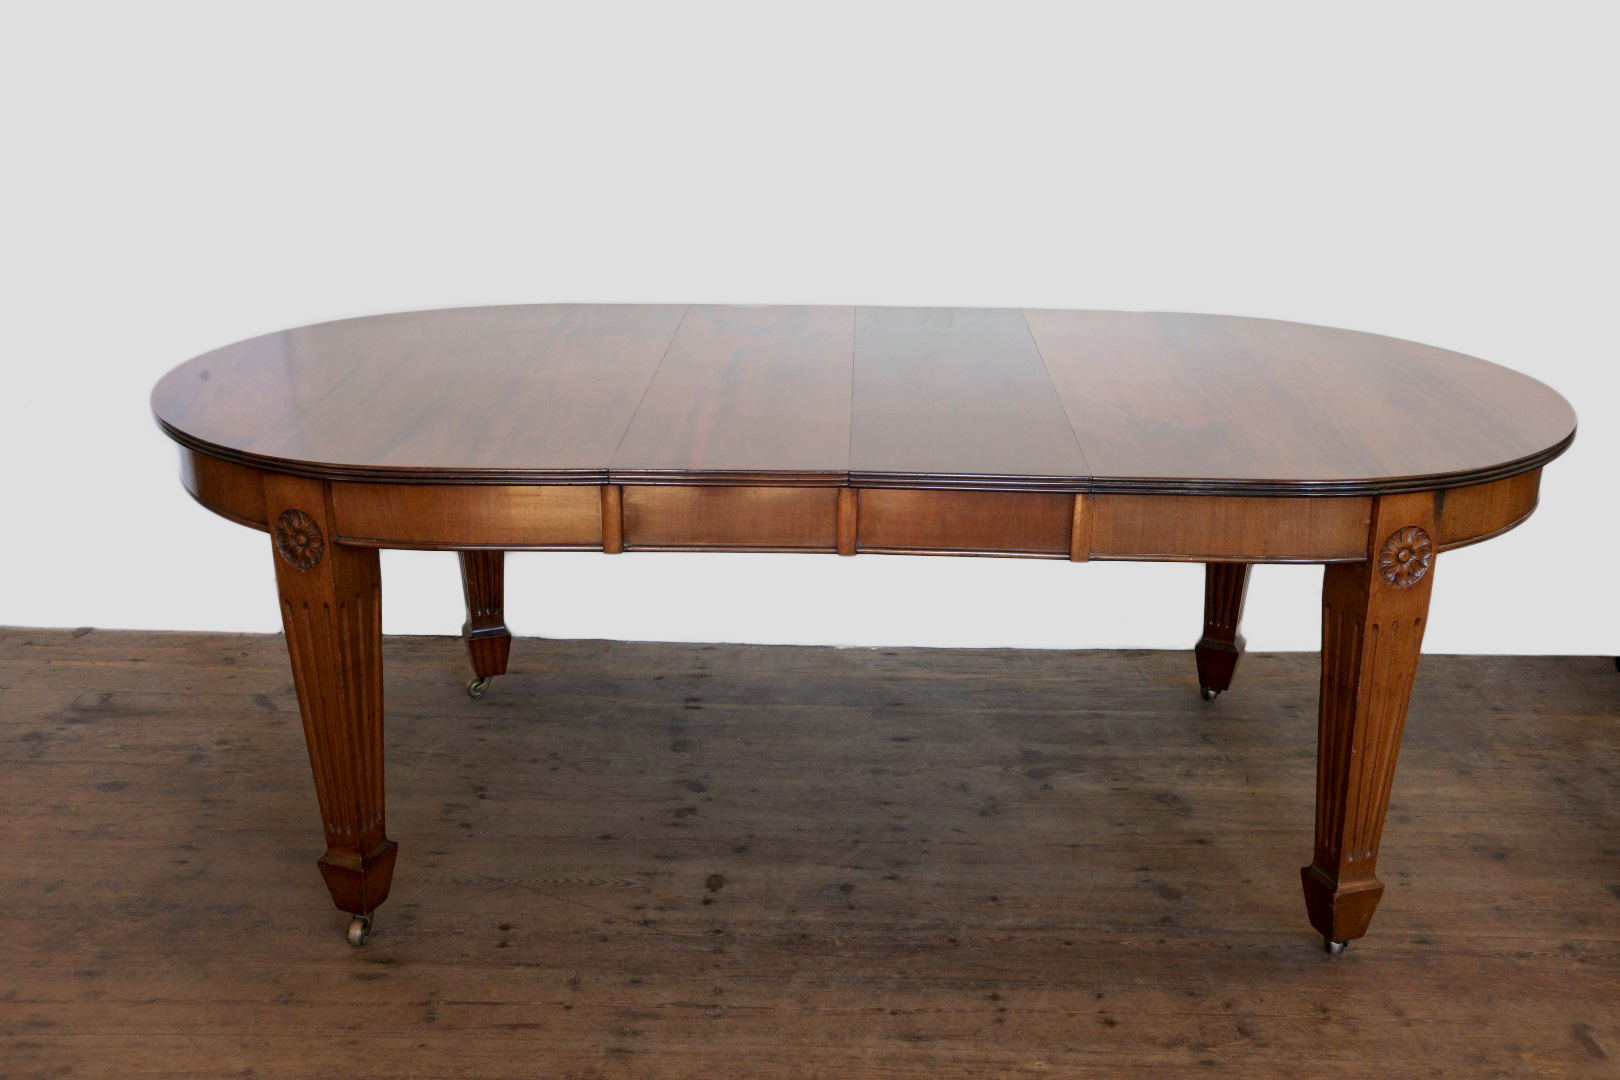 A late Victorian/early Edwardian mahogany extending dining table with reeded frieze and on reeded